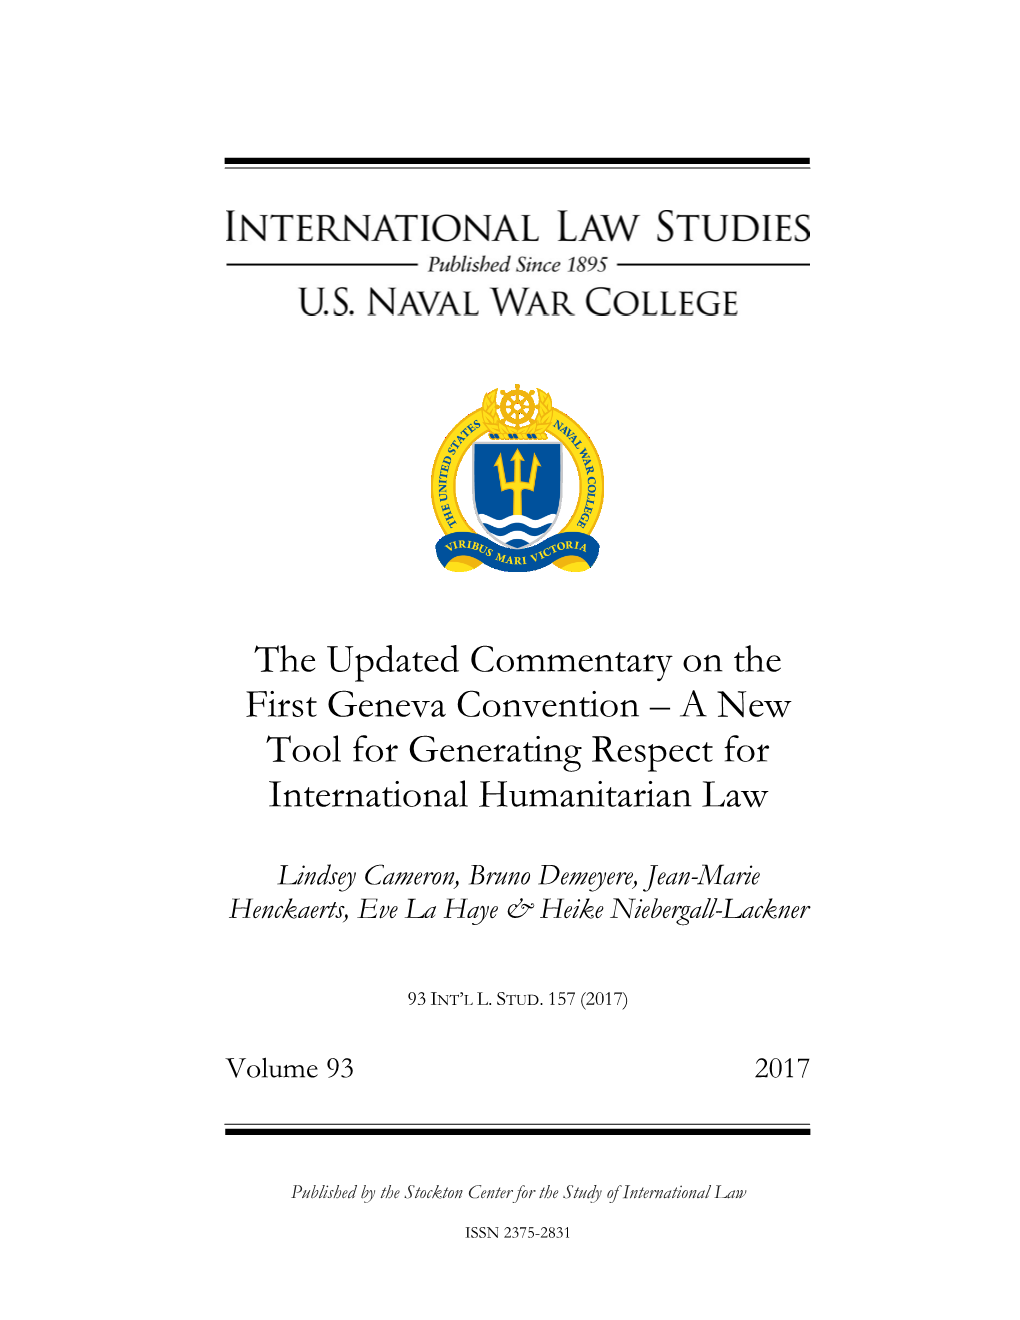 The Updated Commentary on the First Geneva Convention – a New Tool for Generating Respect for International Humanitarian Law